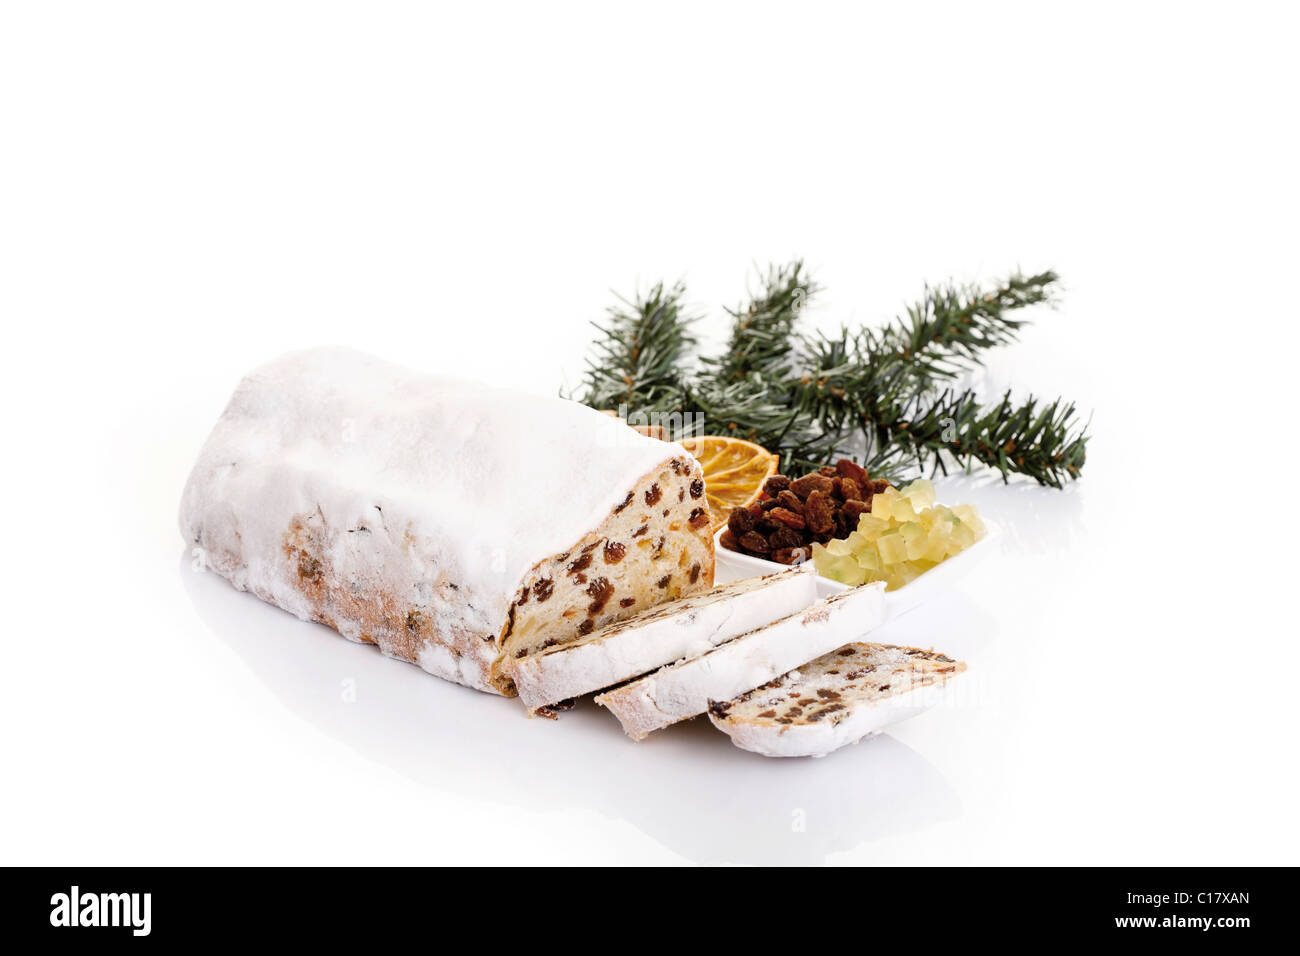 Butter almond Christmas stollen with ingredients and decoration Stock Photo